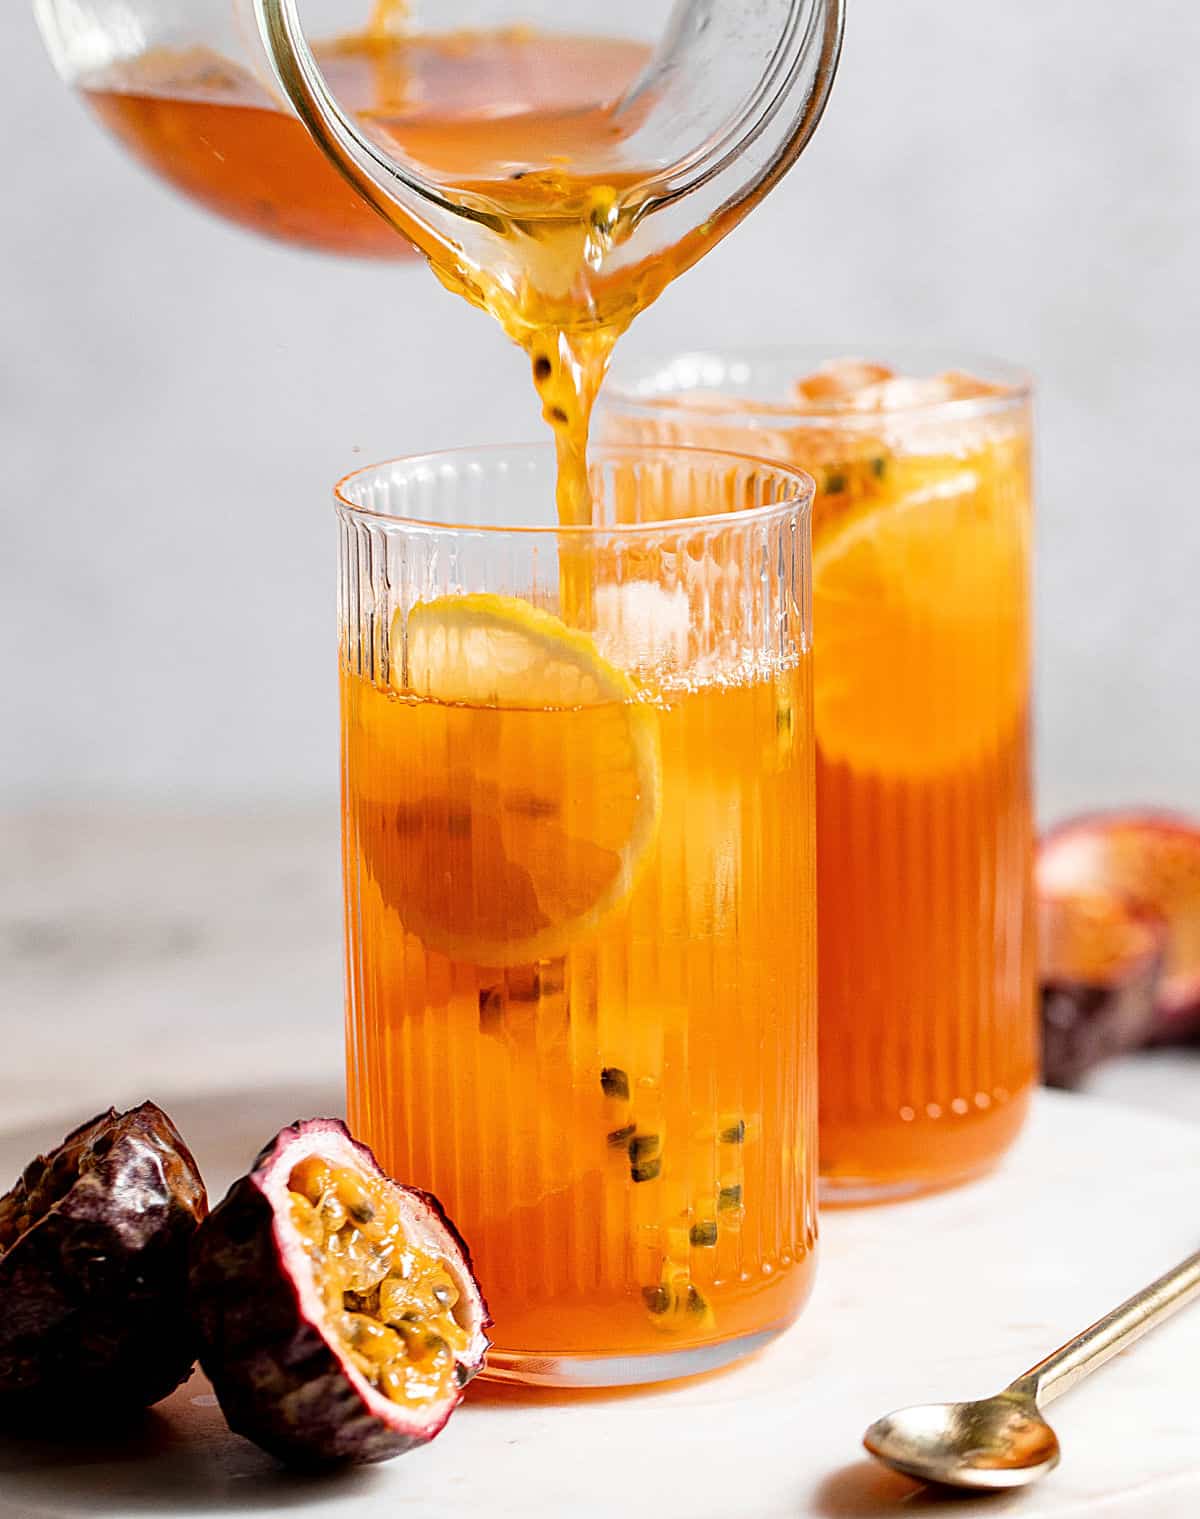 Serving passionfruit tea in tall glasses on a marble surface. Grey background, fresh passionfruit halves.